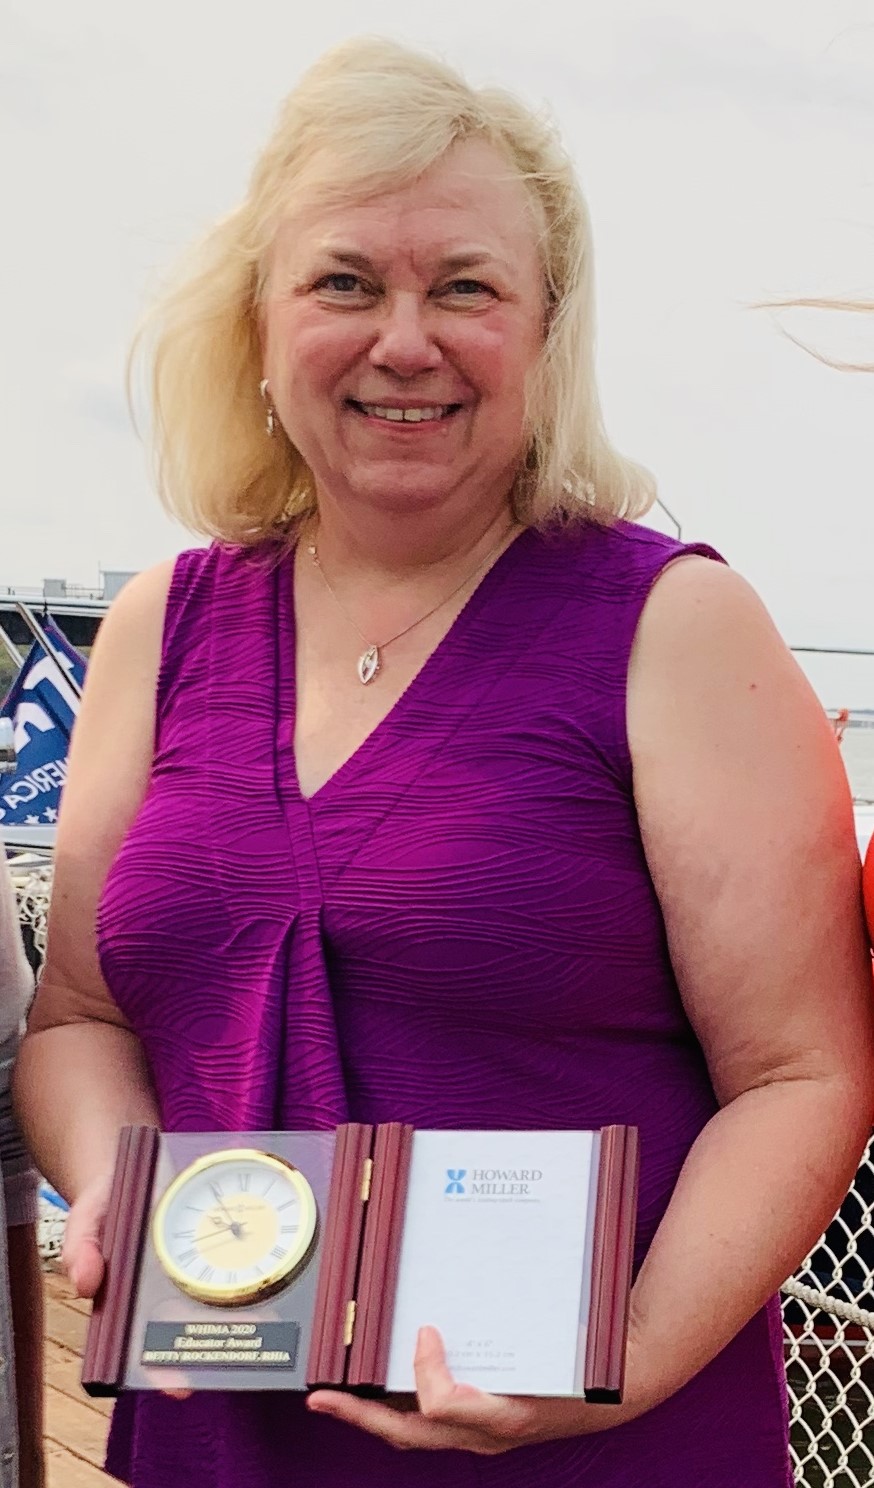 UW HIMT program director and capstone instructor Betty Rockendorf wearing a purple top and holding an award from the Wisconsin Health Information Management Association.